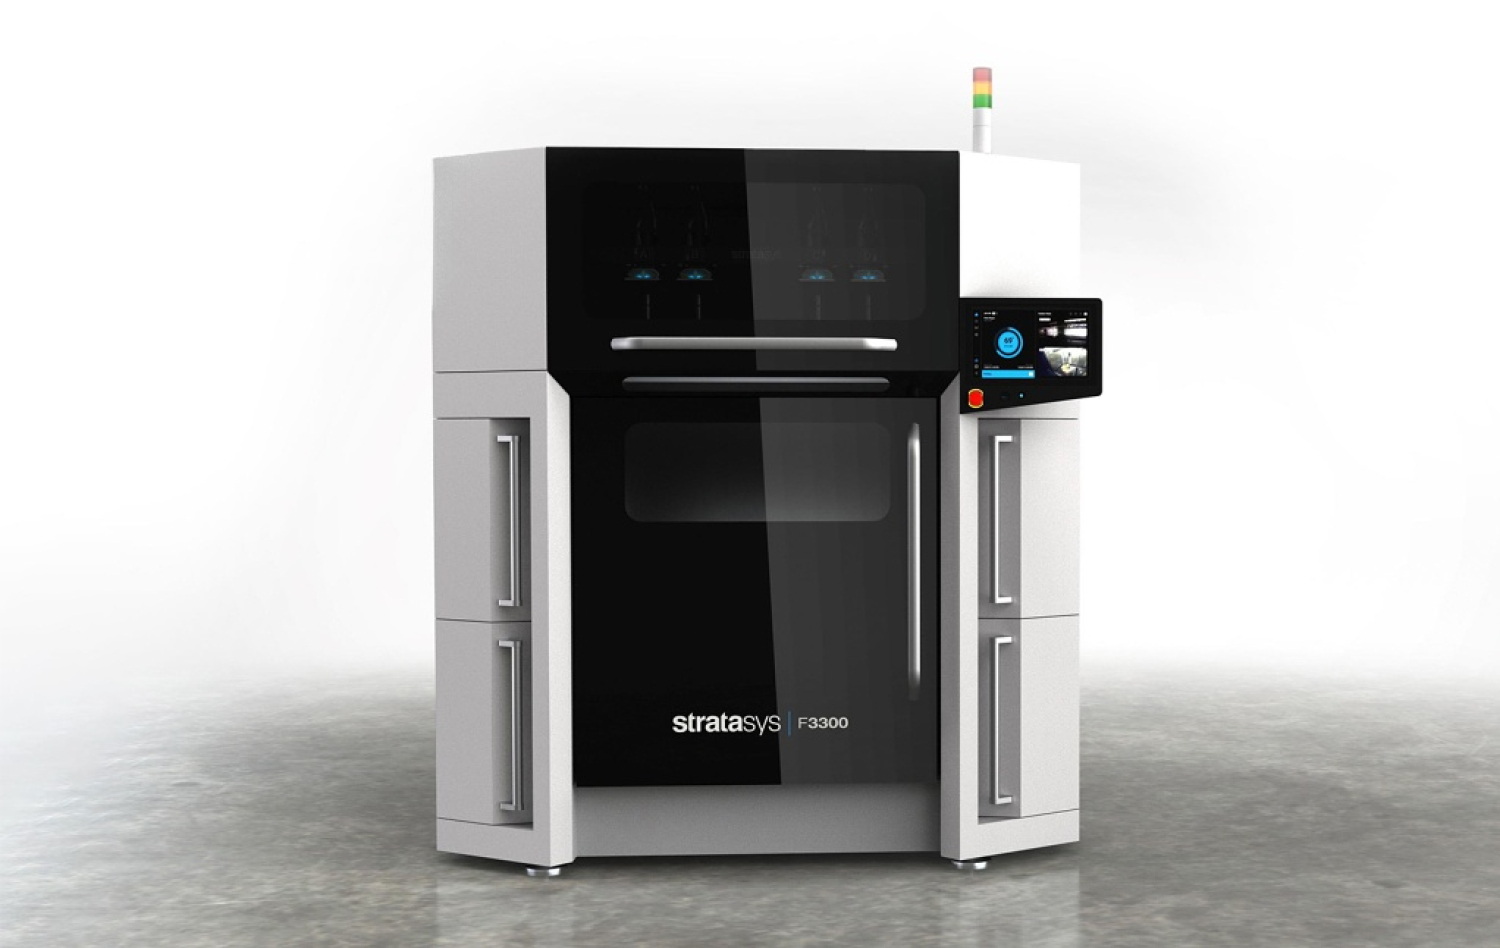 Distributor of Stratasys 3D printers, MCAE Systems introduces the most sophisticated industrial 3D printer on the market